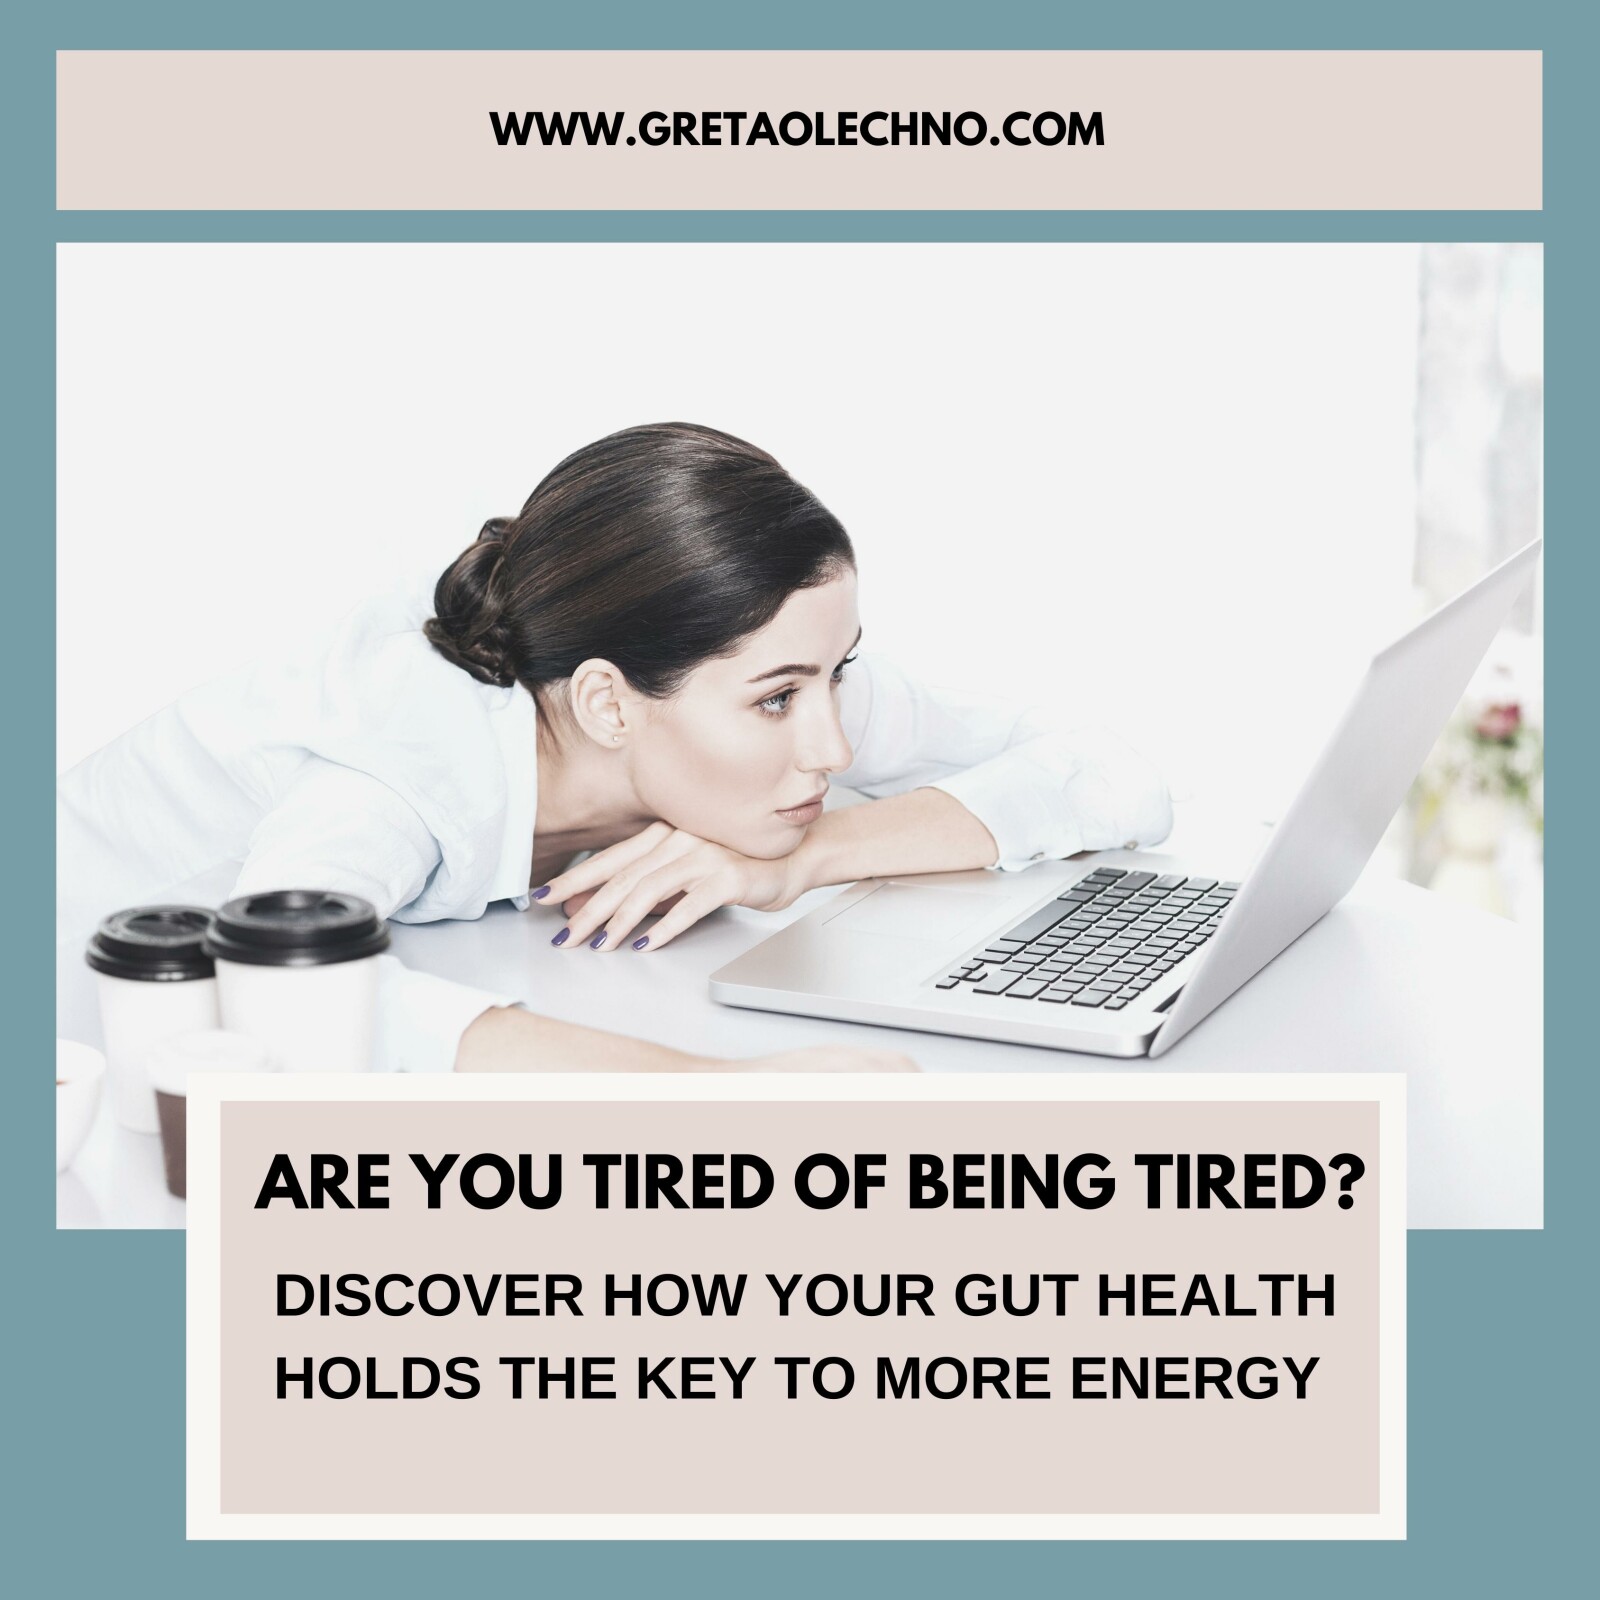 Are You Tired of Being Tired? Discover How Your Gut Health Holds the Key to More Energy